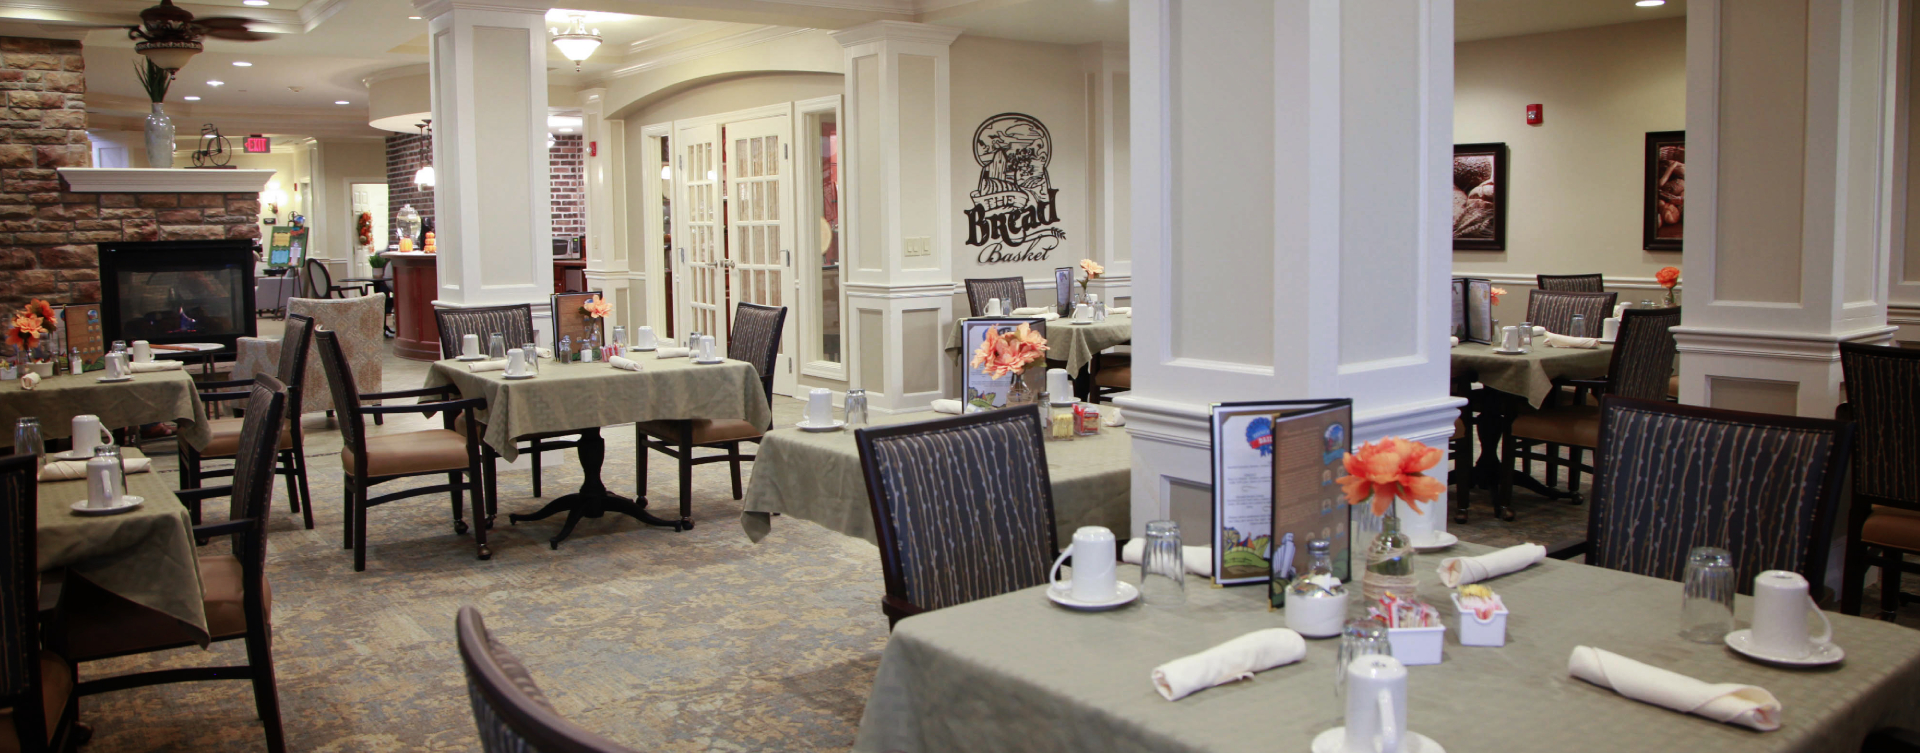 Enjoy homestyle food with made-from-scratch recipes in our dining room at Bickford of St. Charles